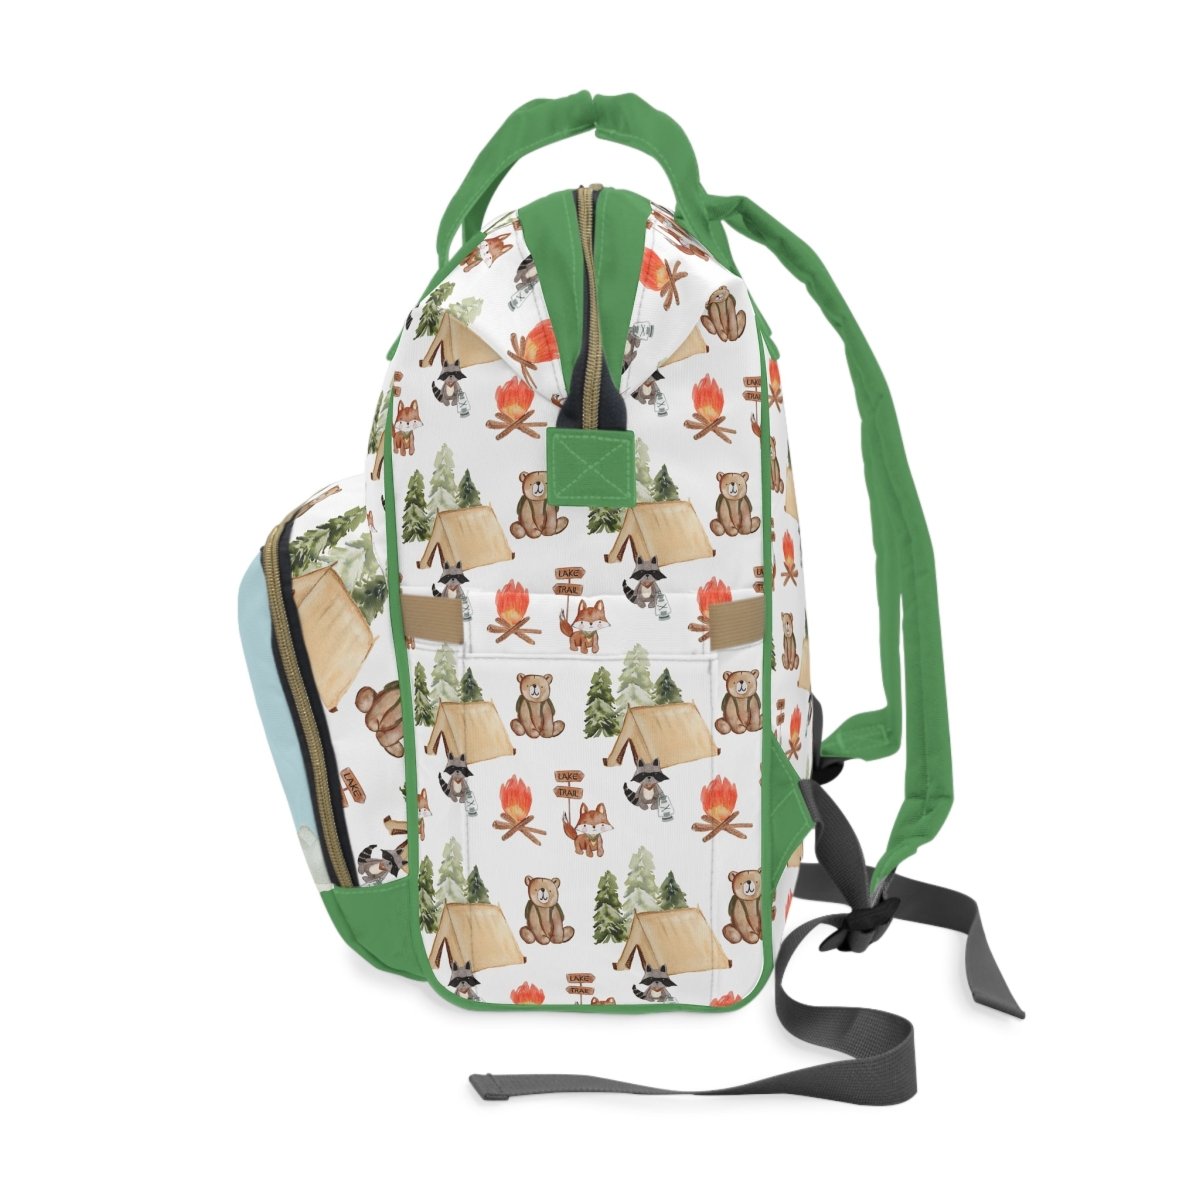 Woodland Camper Personalized Backpack Diaper Bag - gender_boy, text, Theme_Woodland